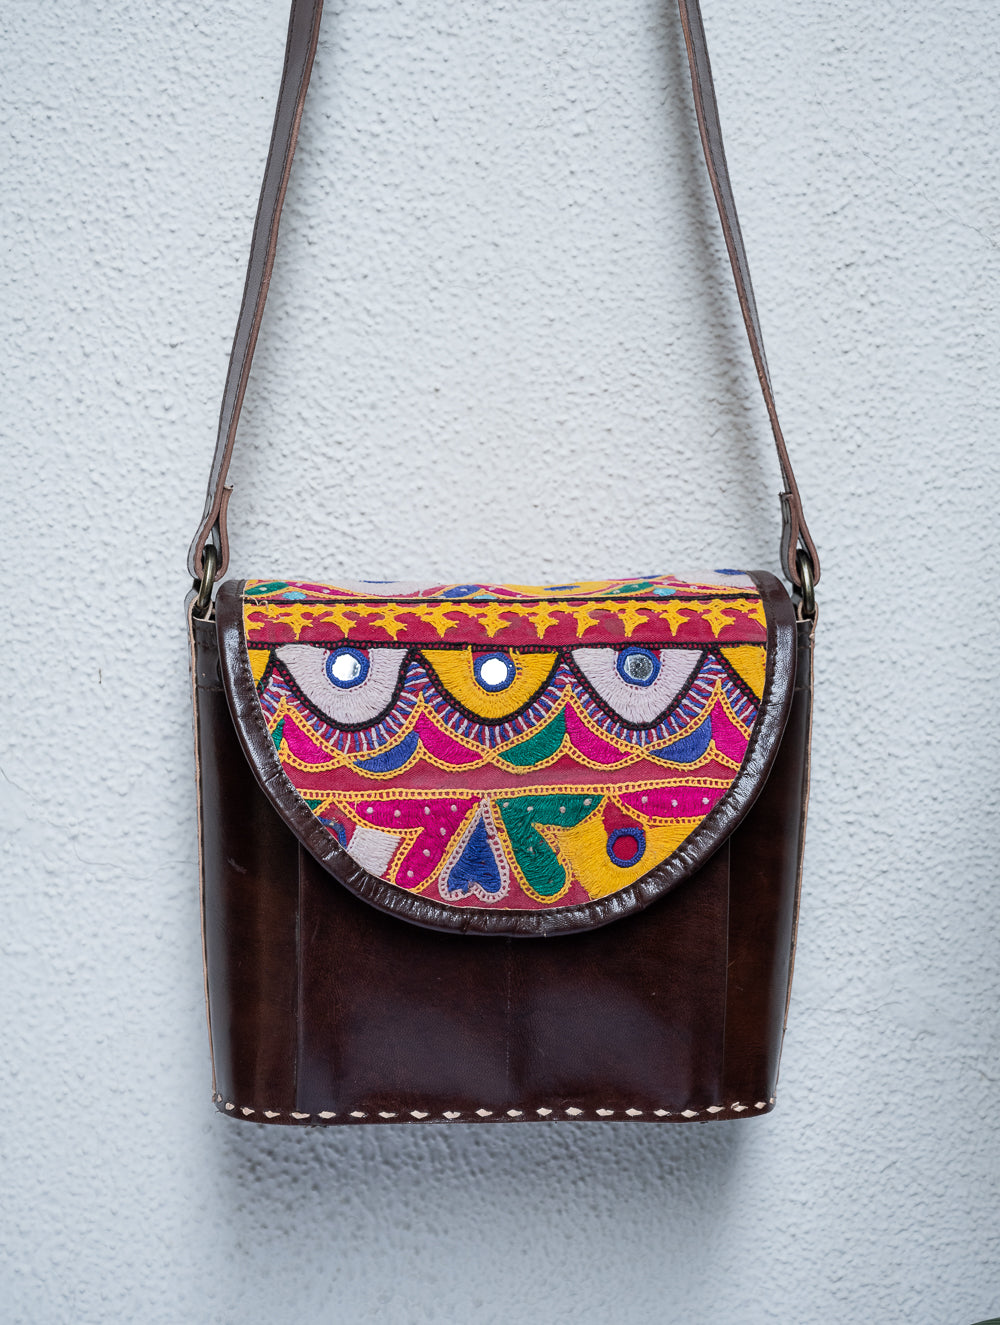 Load image into Gallery viewer, Handcrafted Jawaja Leather Sling Bag with Embroidered Detail